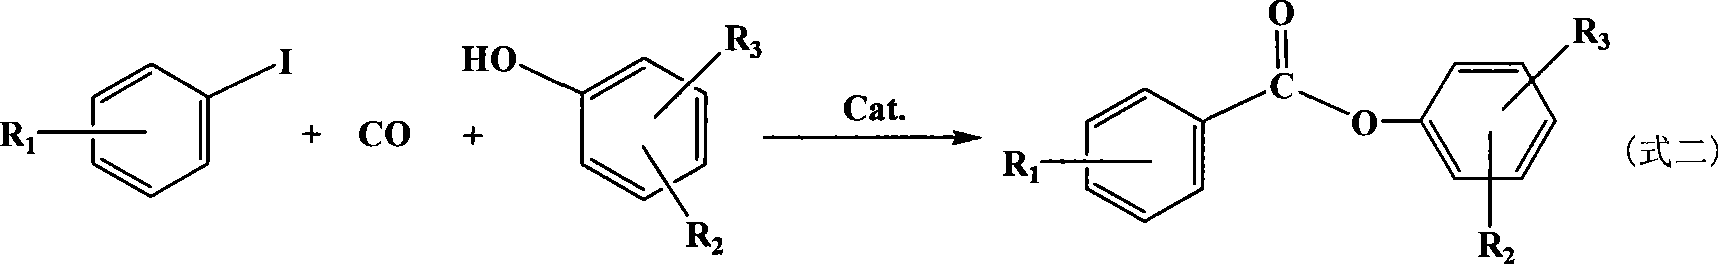 Method for synthesizing aromatic carboxylic ether by iodo aromatic hydrocarbon acarbonylation